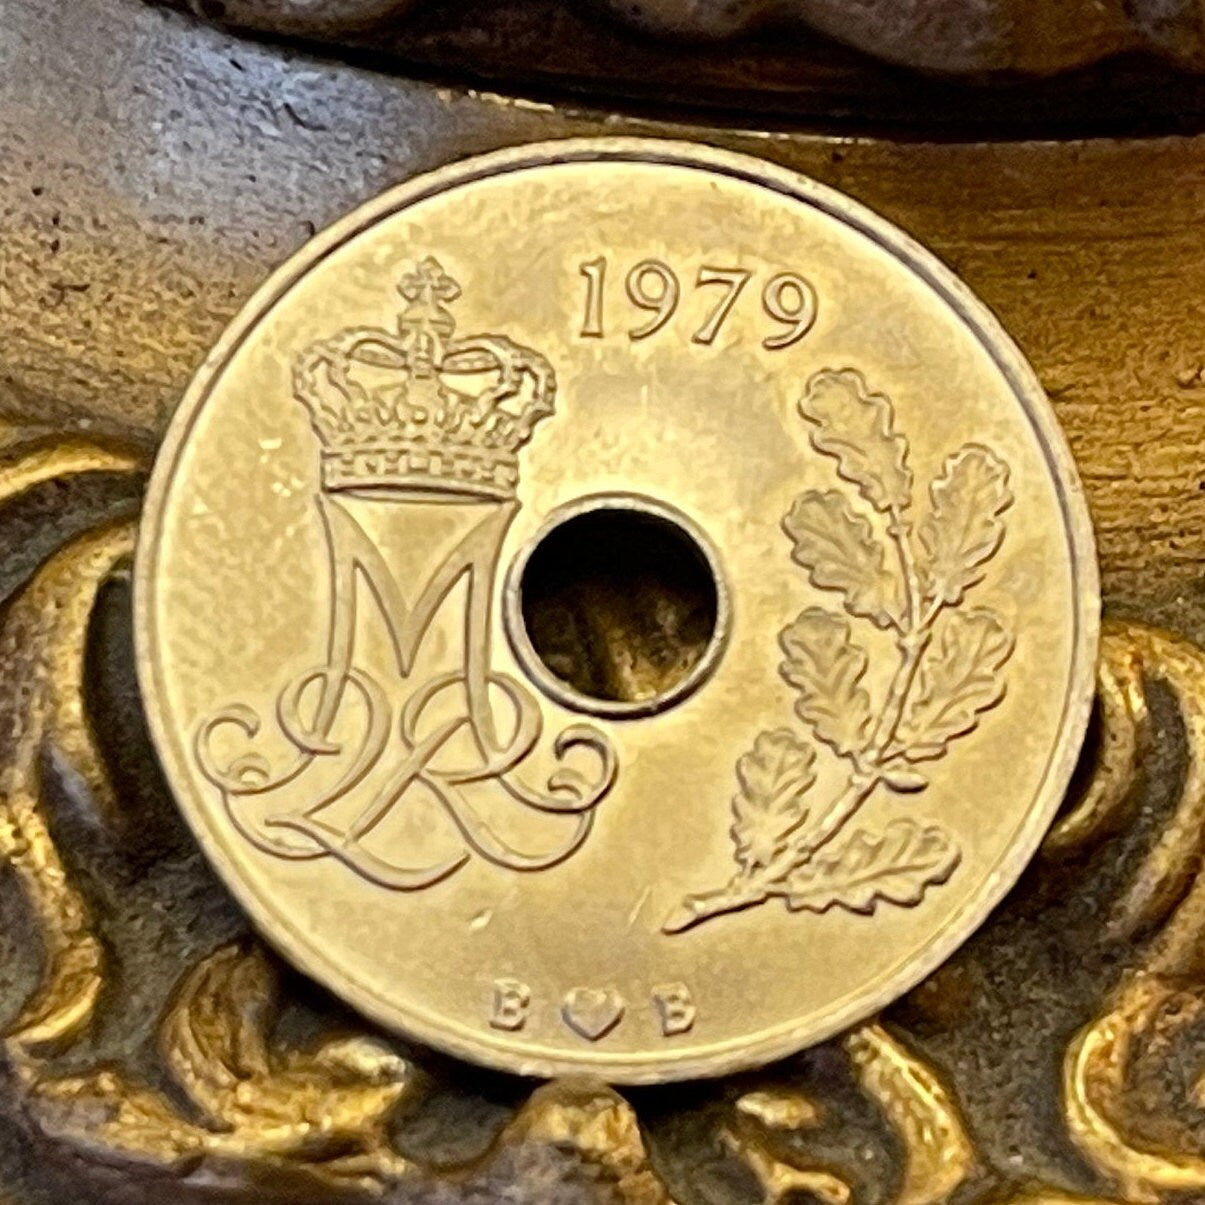 Queen Margrethe II Monogram & Oak Branch 25 Ore Denmark Authentic Coin Money for Jewelry and Craft Making (Hole in Coin)